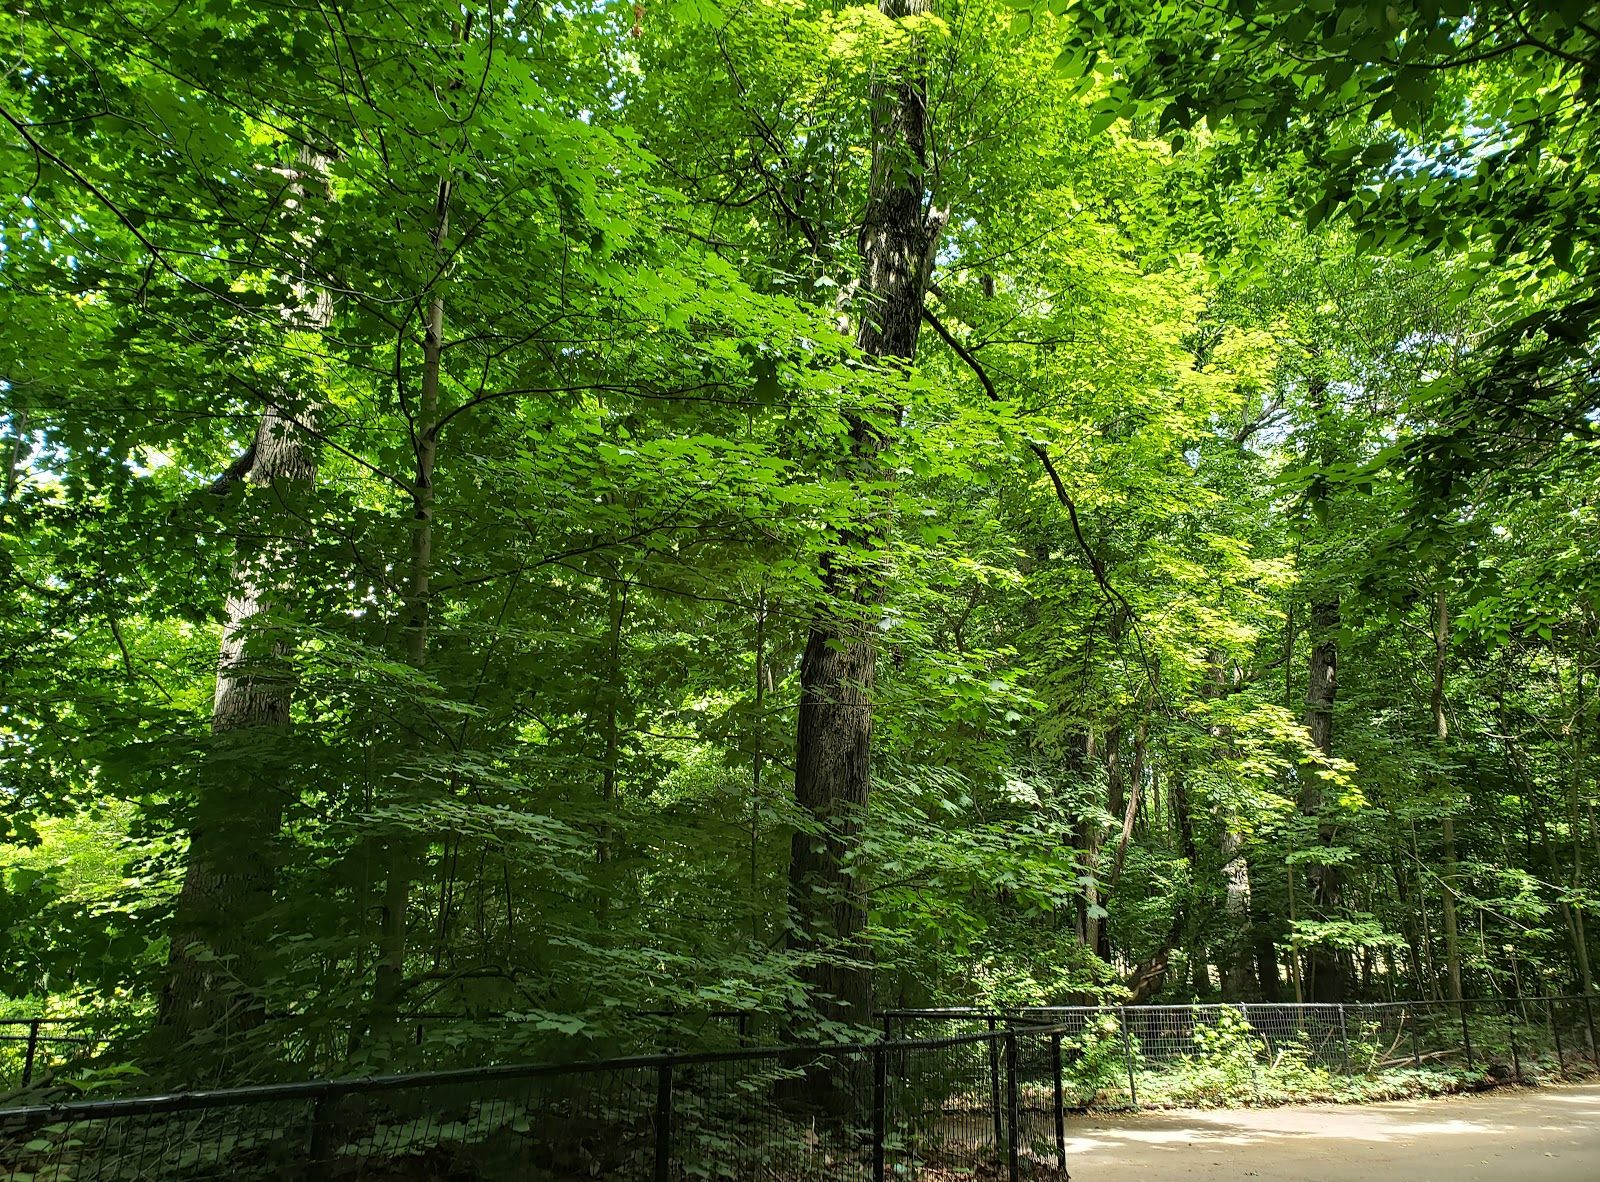 Entering the core woodlands of Prospect Park. Image by Clarisa Diaz. United States, 2020.
